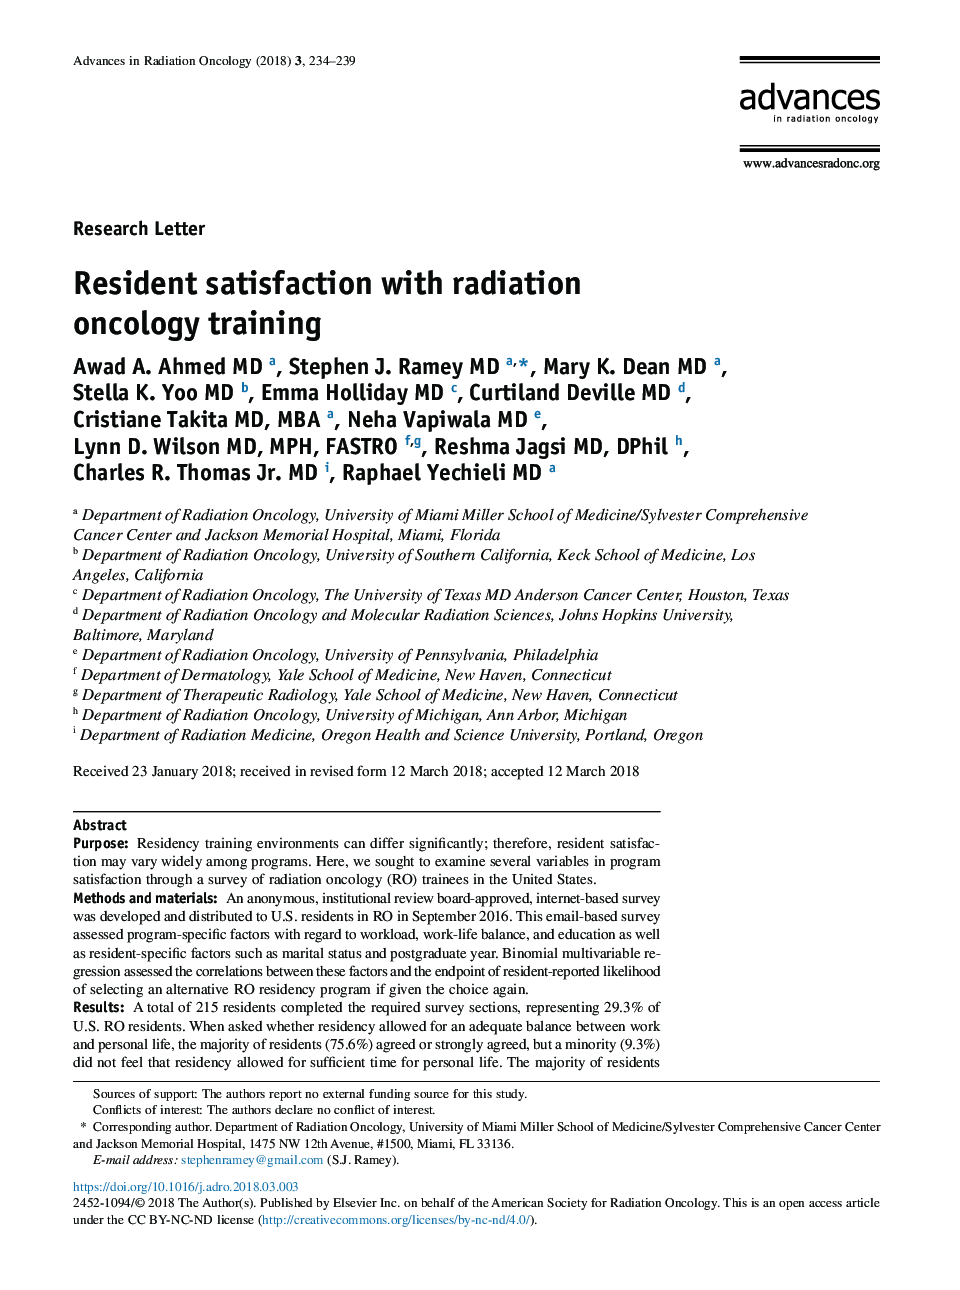 Resident satisfaction with radiation oncology training